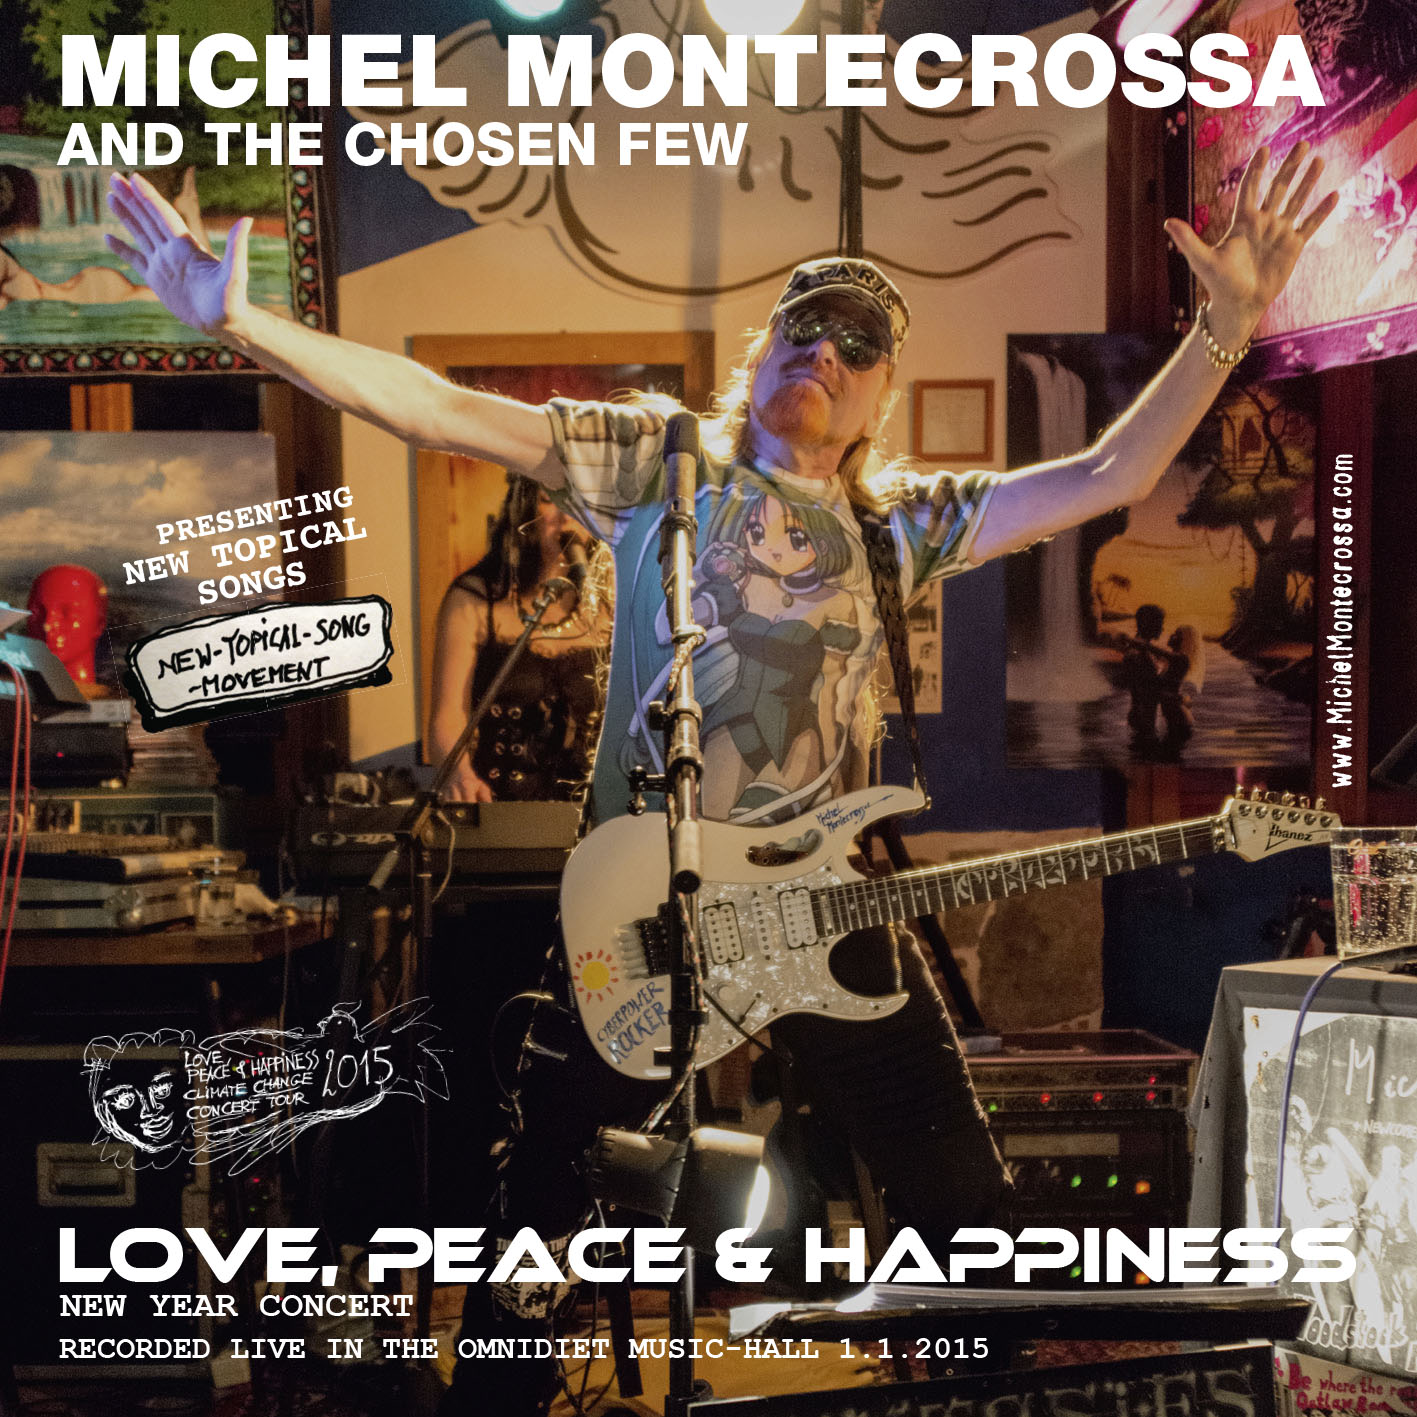 Love, Peace & Happiness New Year Concert